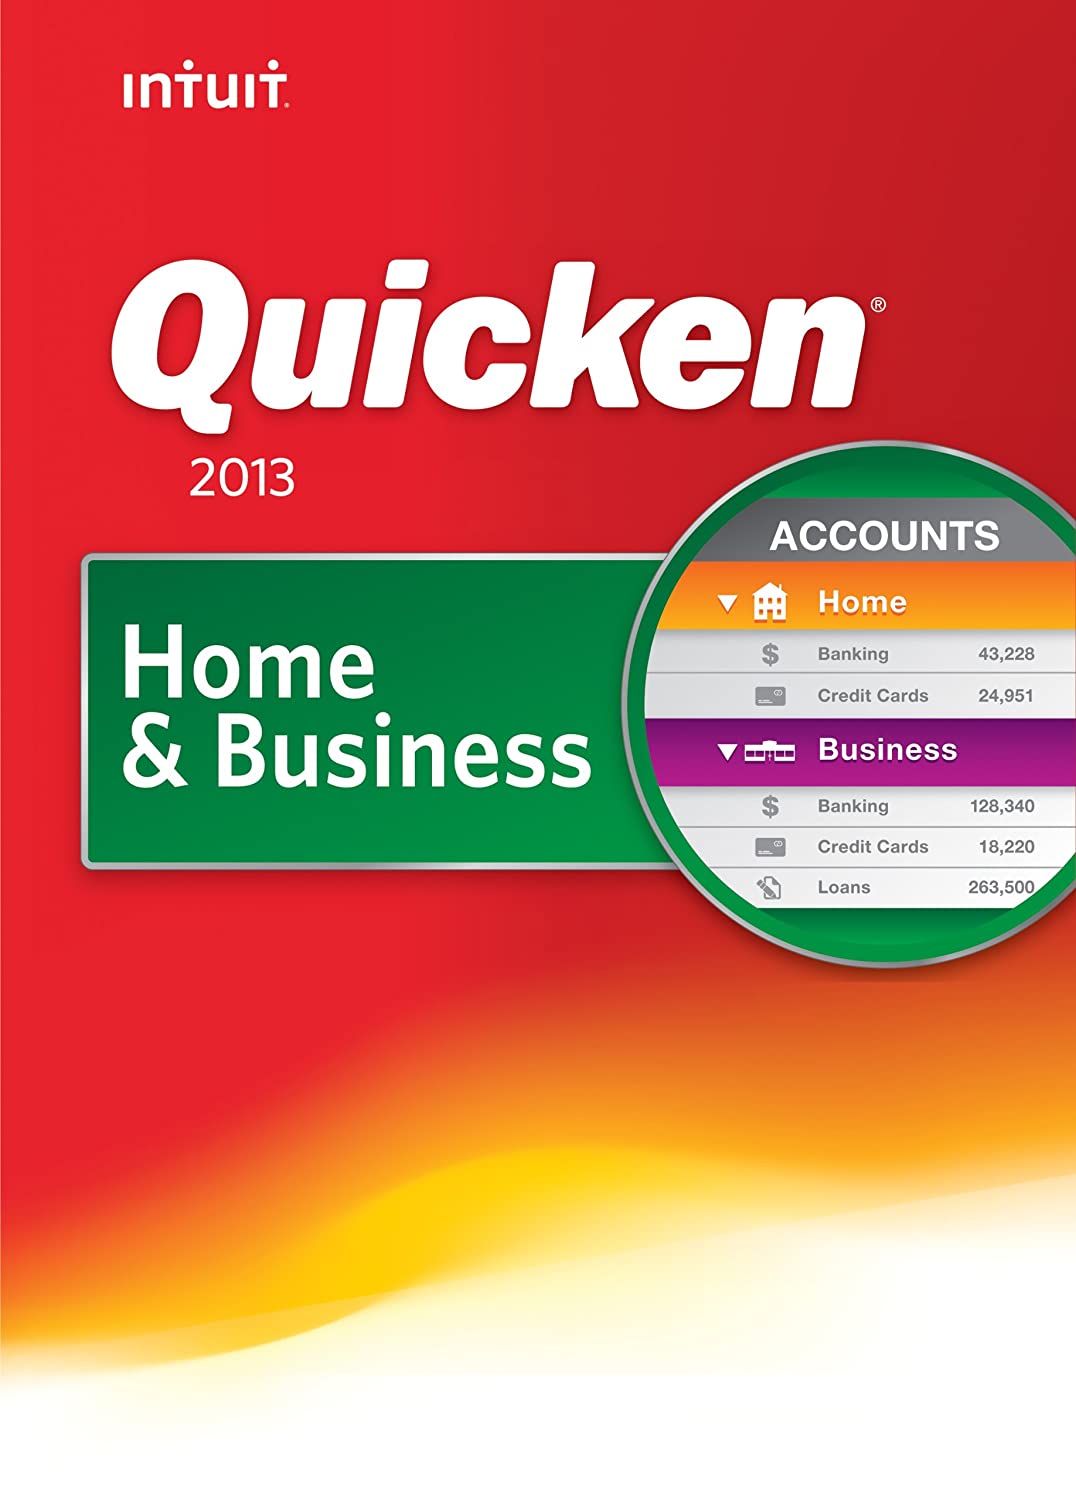 quicken home & business for mac 2013